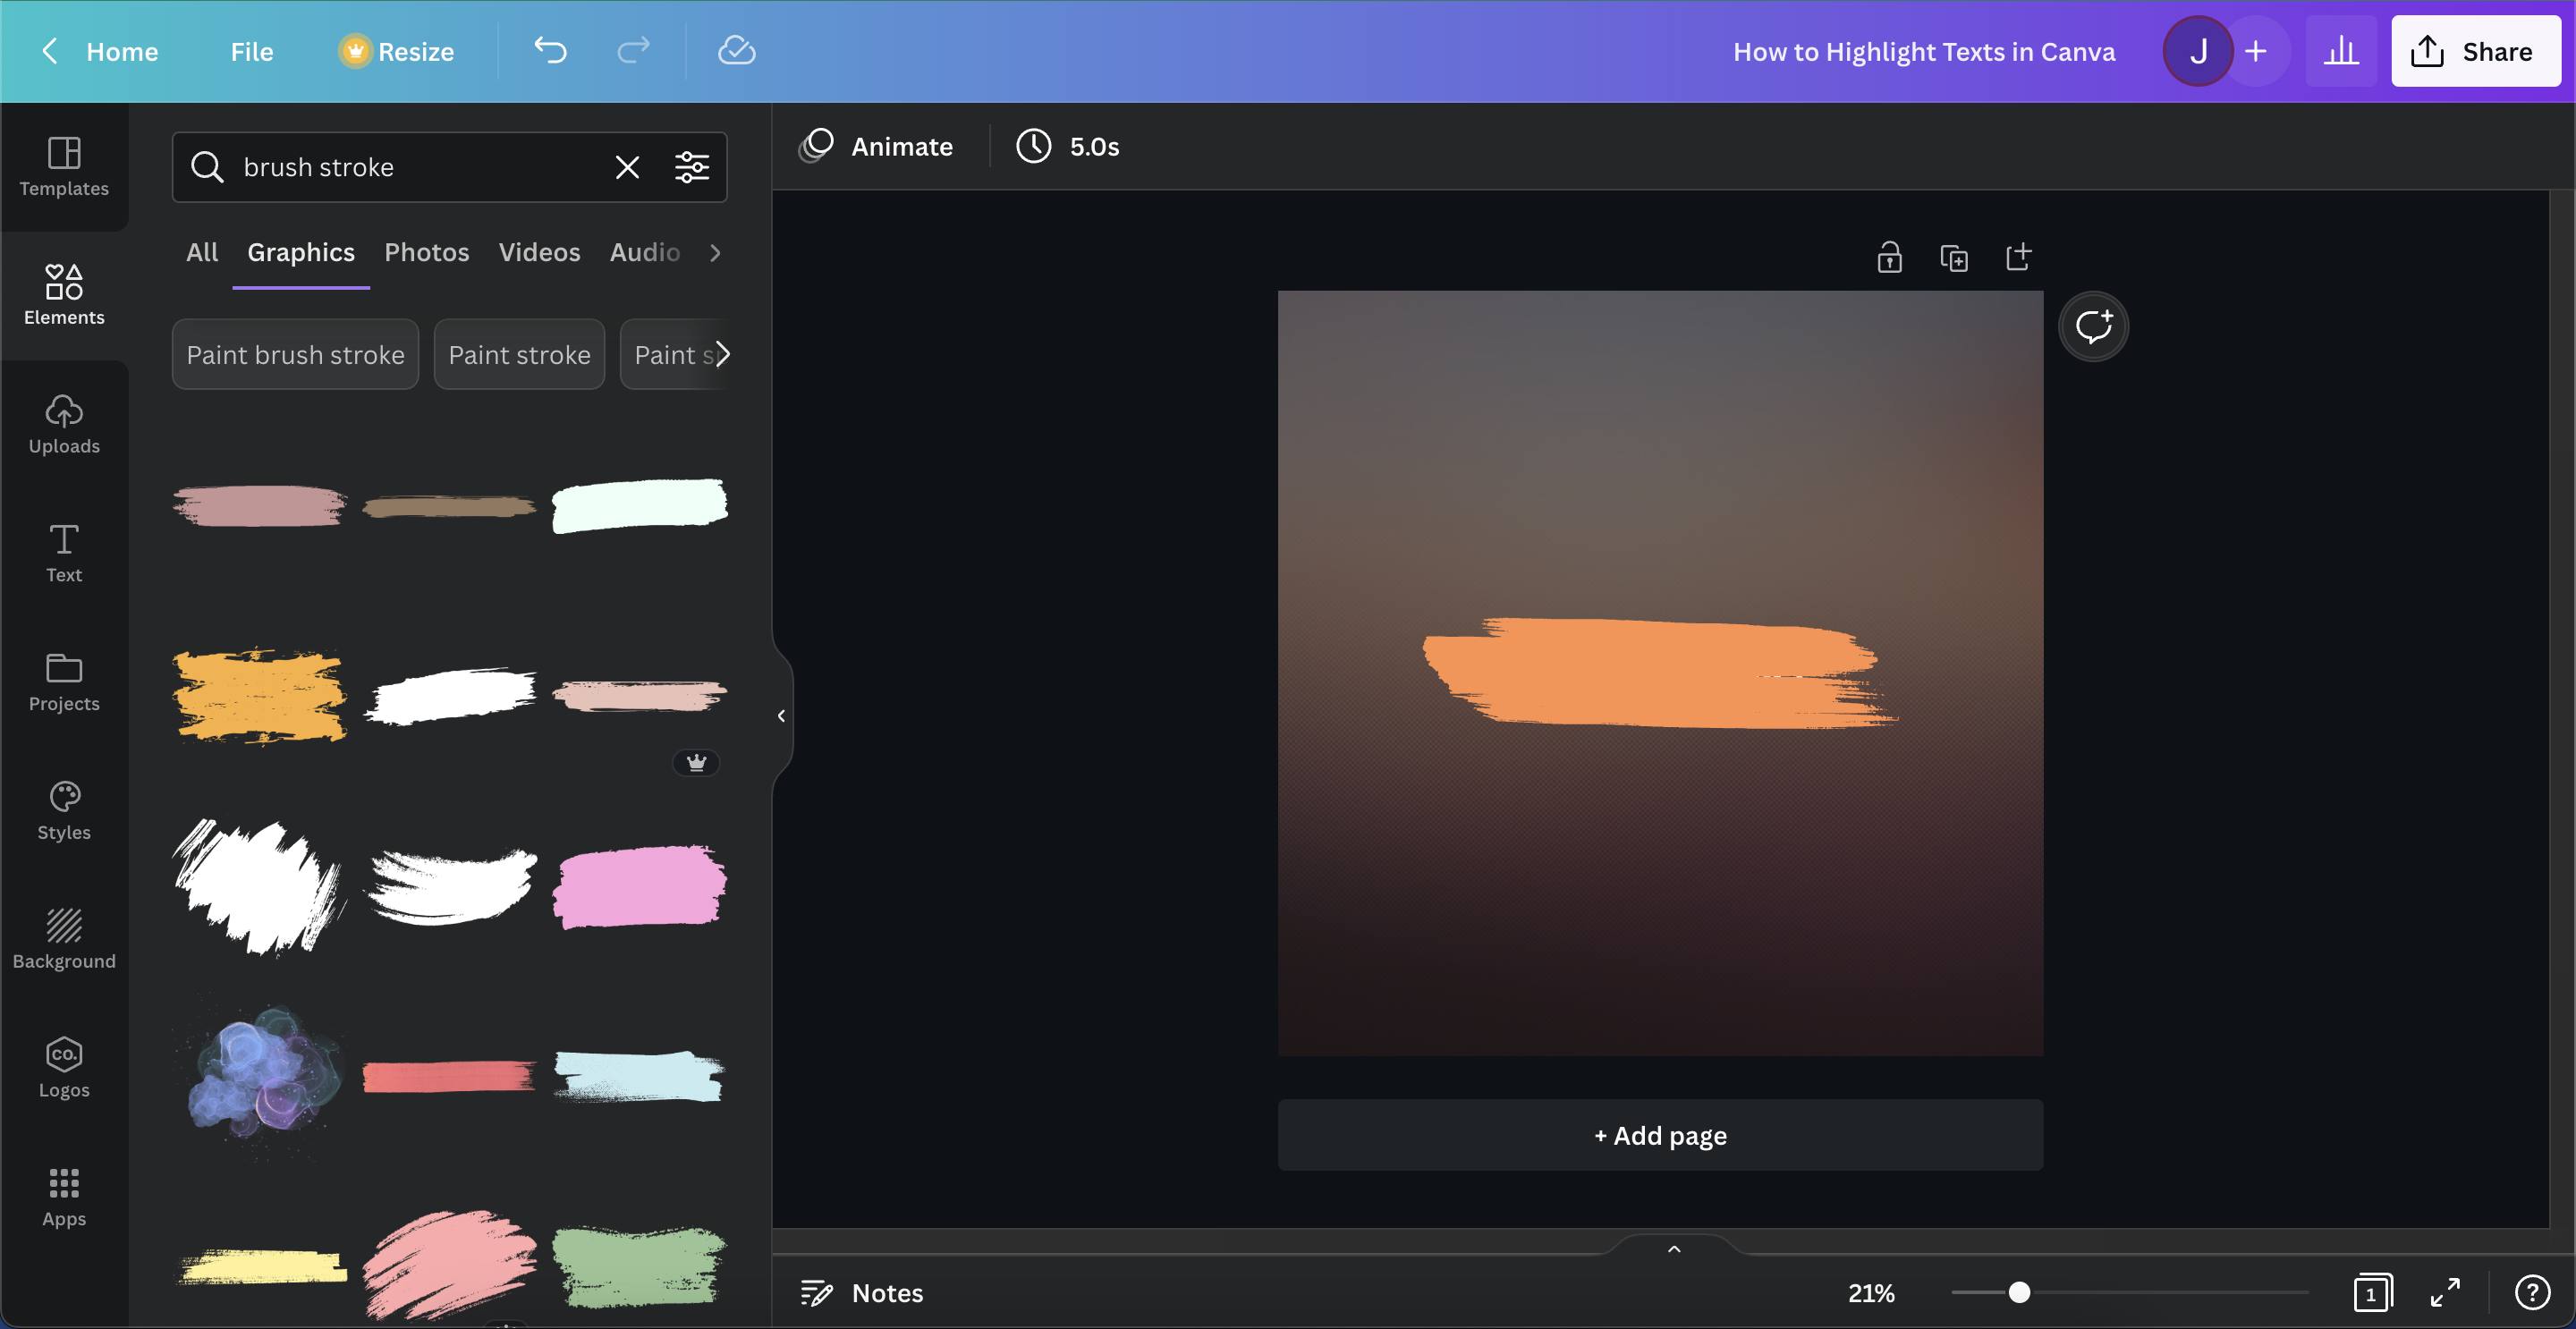 Highlight text in Canva 7